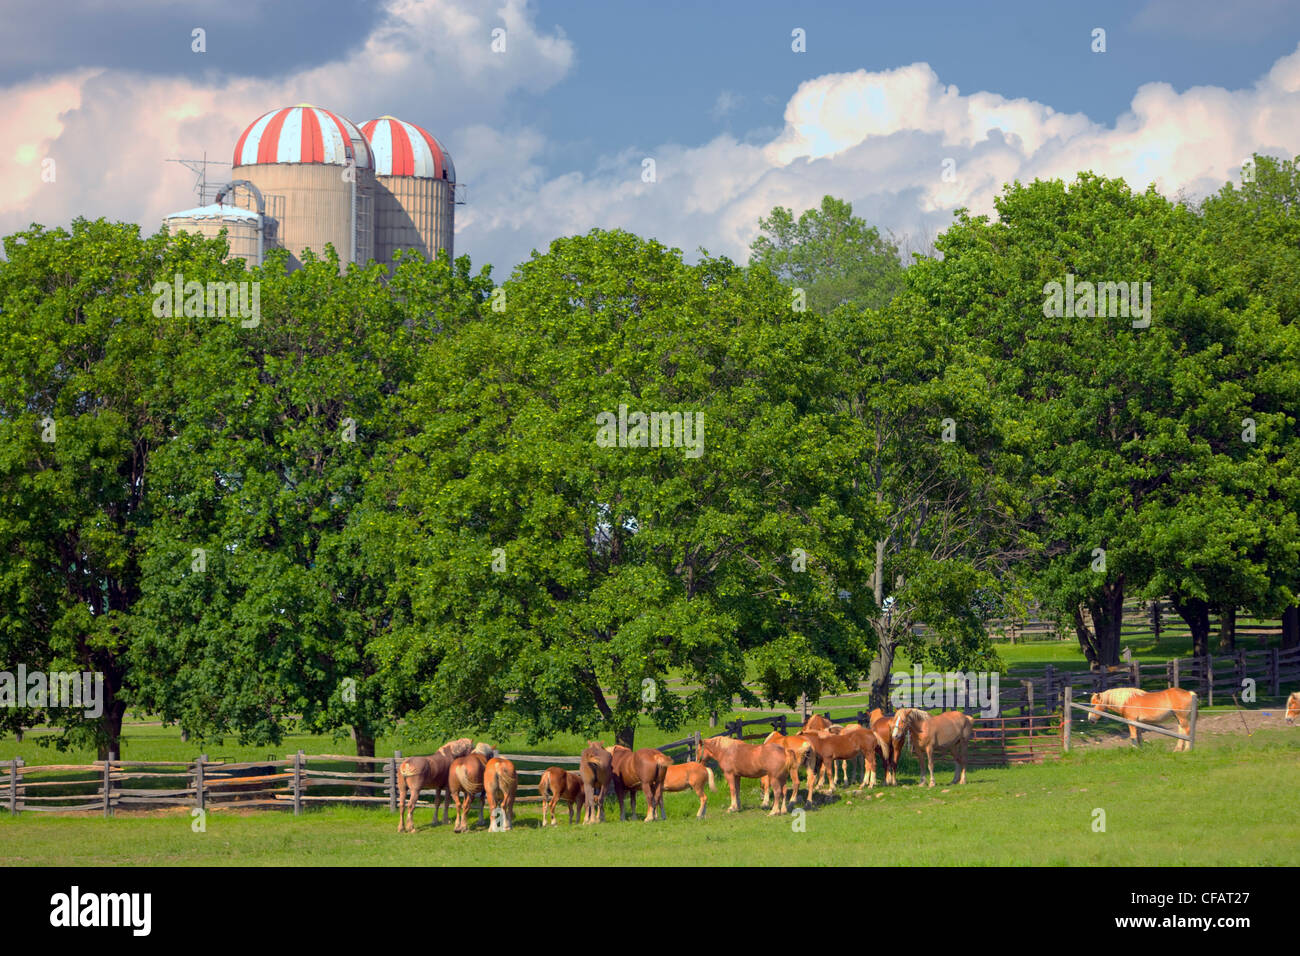 Haflinger horses with silos in the background, Sidney, Ontario, Canada. Stock Photo